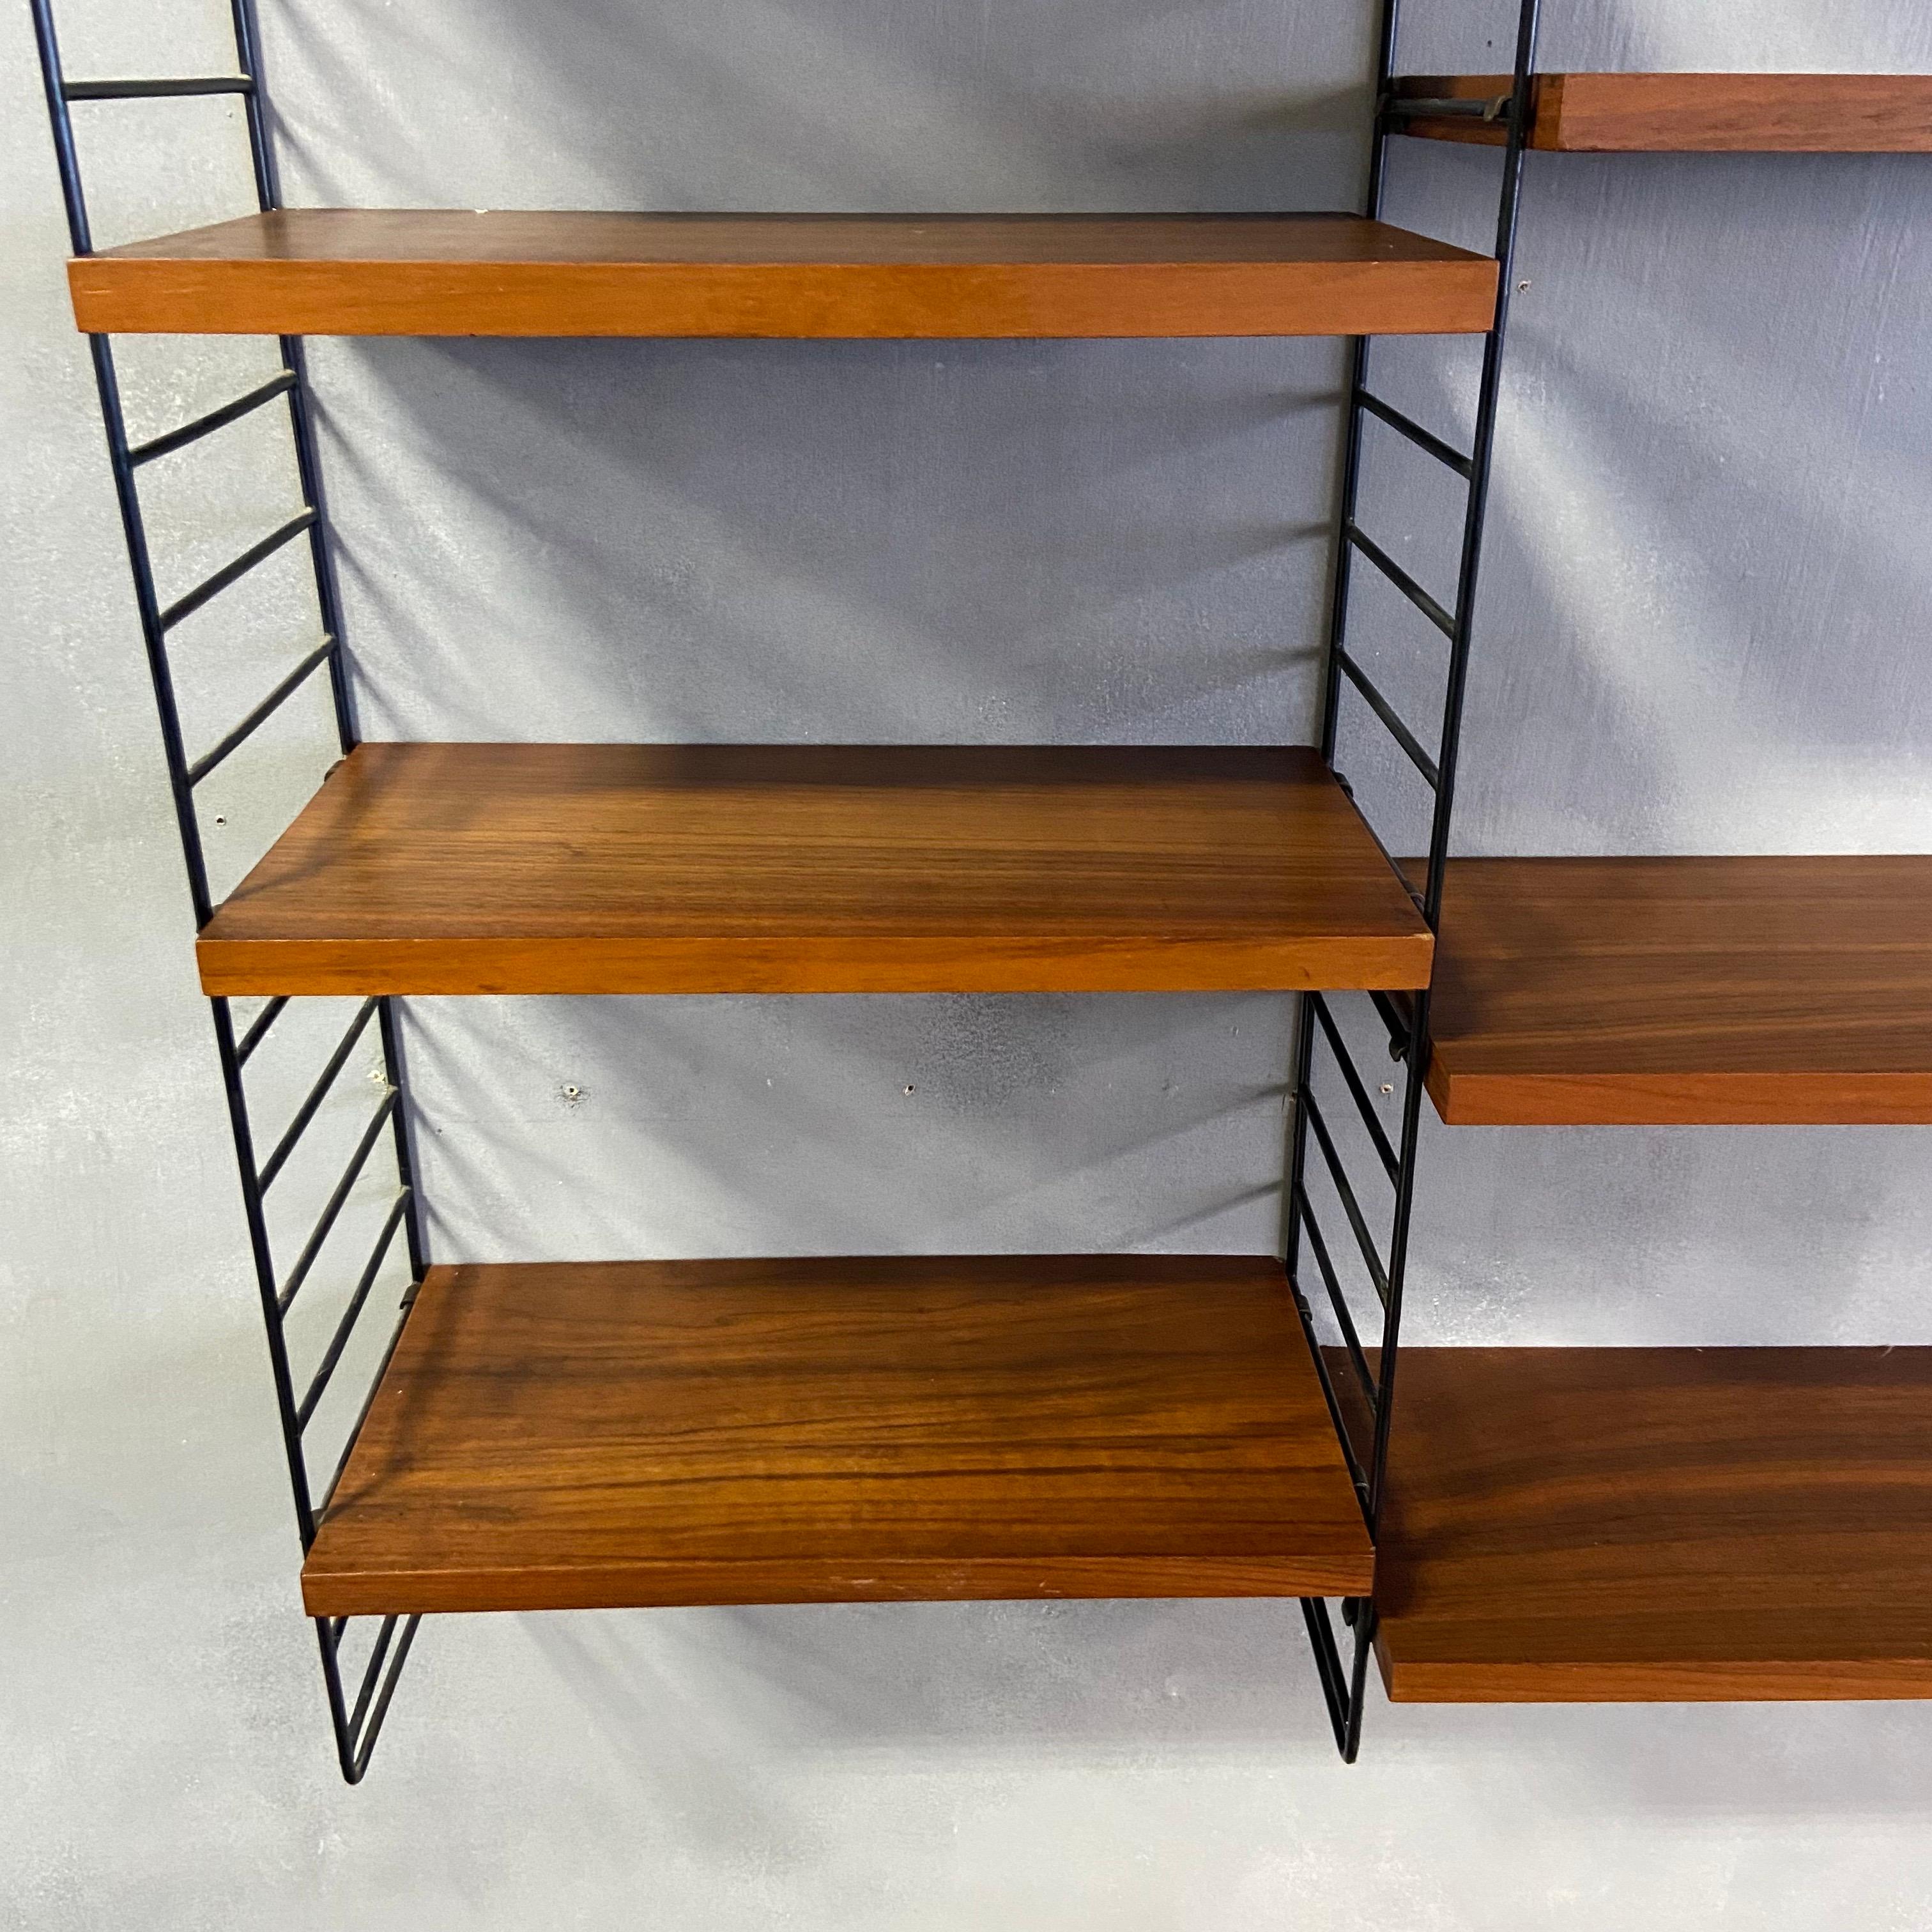 Original Midcentury String Shelving Unit by Nils Strinning For Sale 3